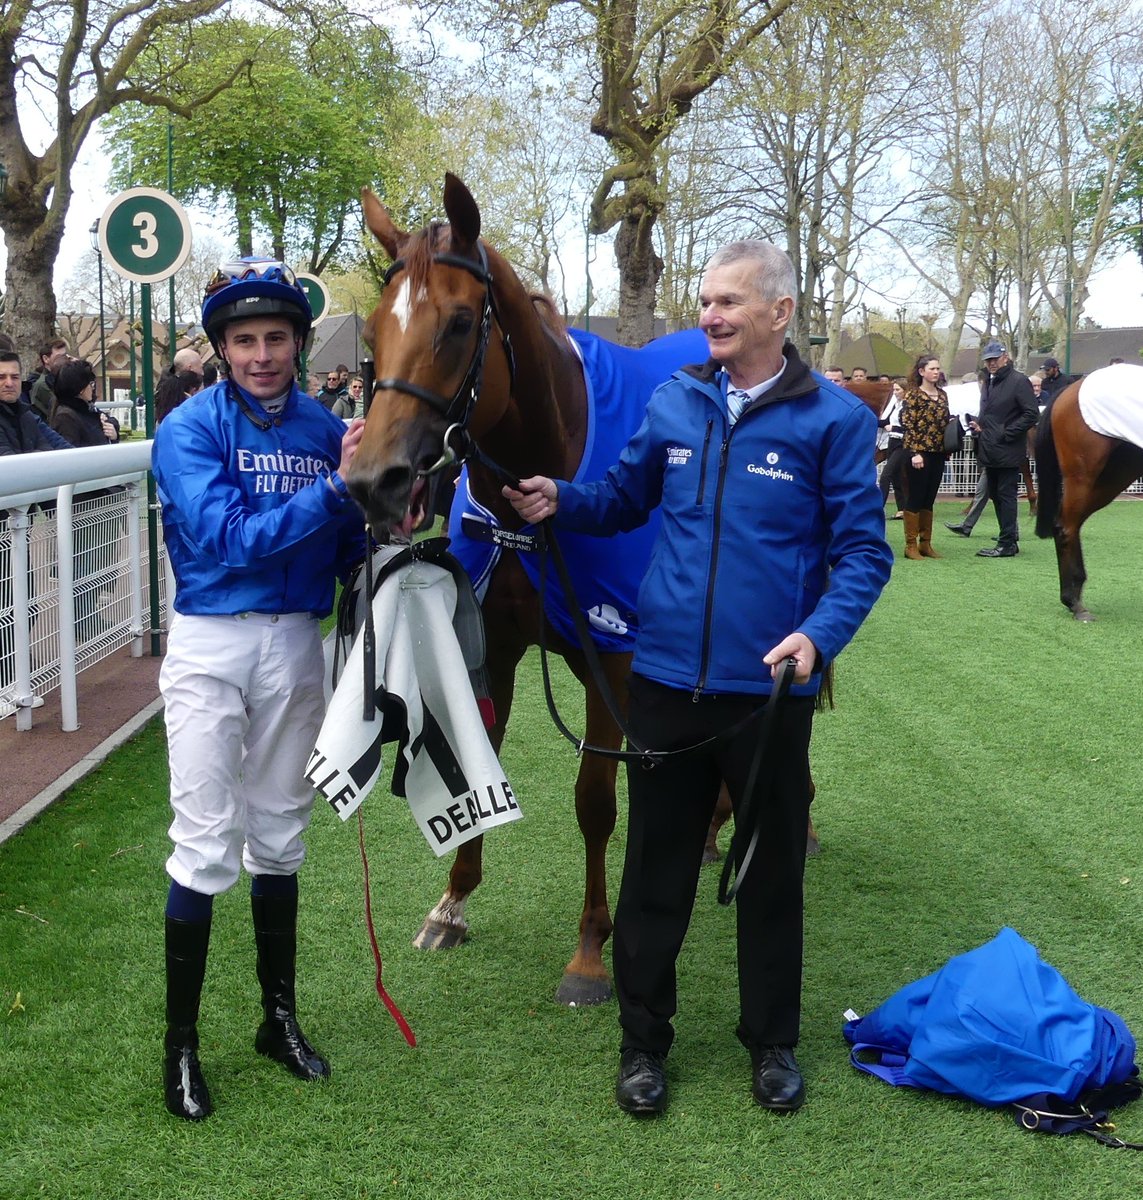 #RomanticStyle books her spot in the 🇫🇷 1,000 Guineas / Emirates Poule d'Essai des Pouliches with a pleasing return to action in the G3 Prix Imprudence @fgdeauville for @godolphin, Charlie Appleby and William Buick @RacingPost @rpbloodstock